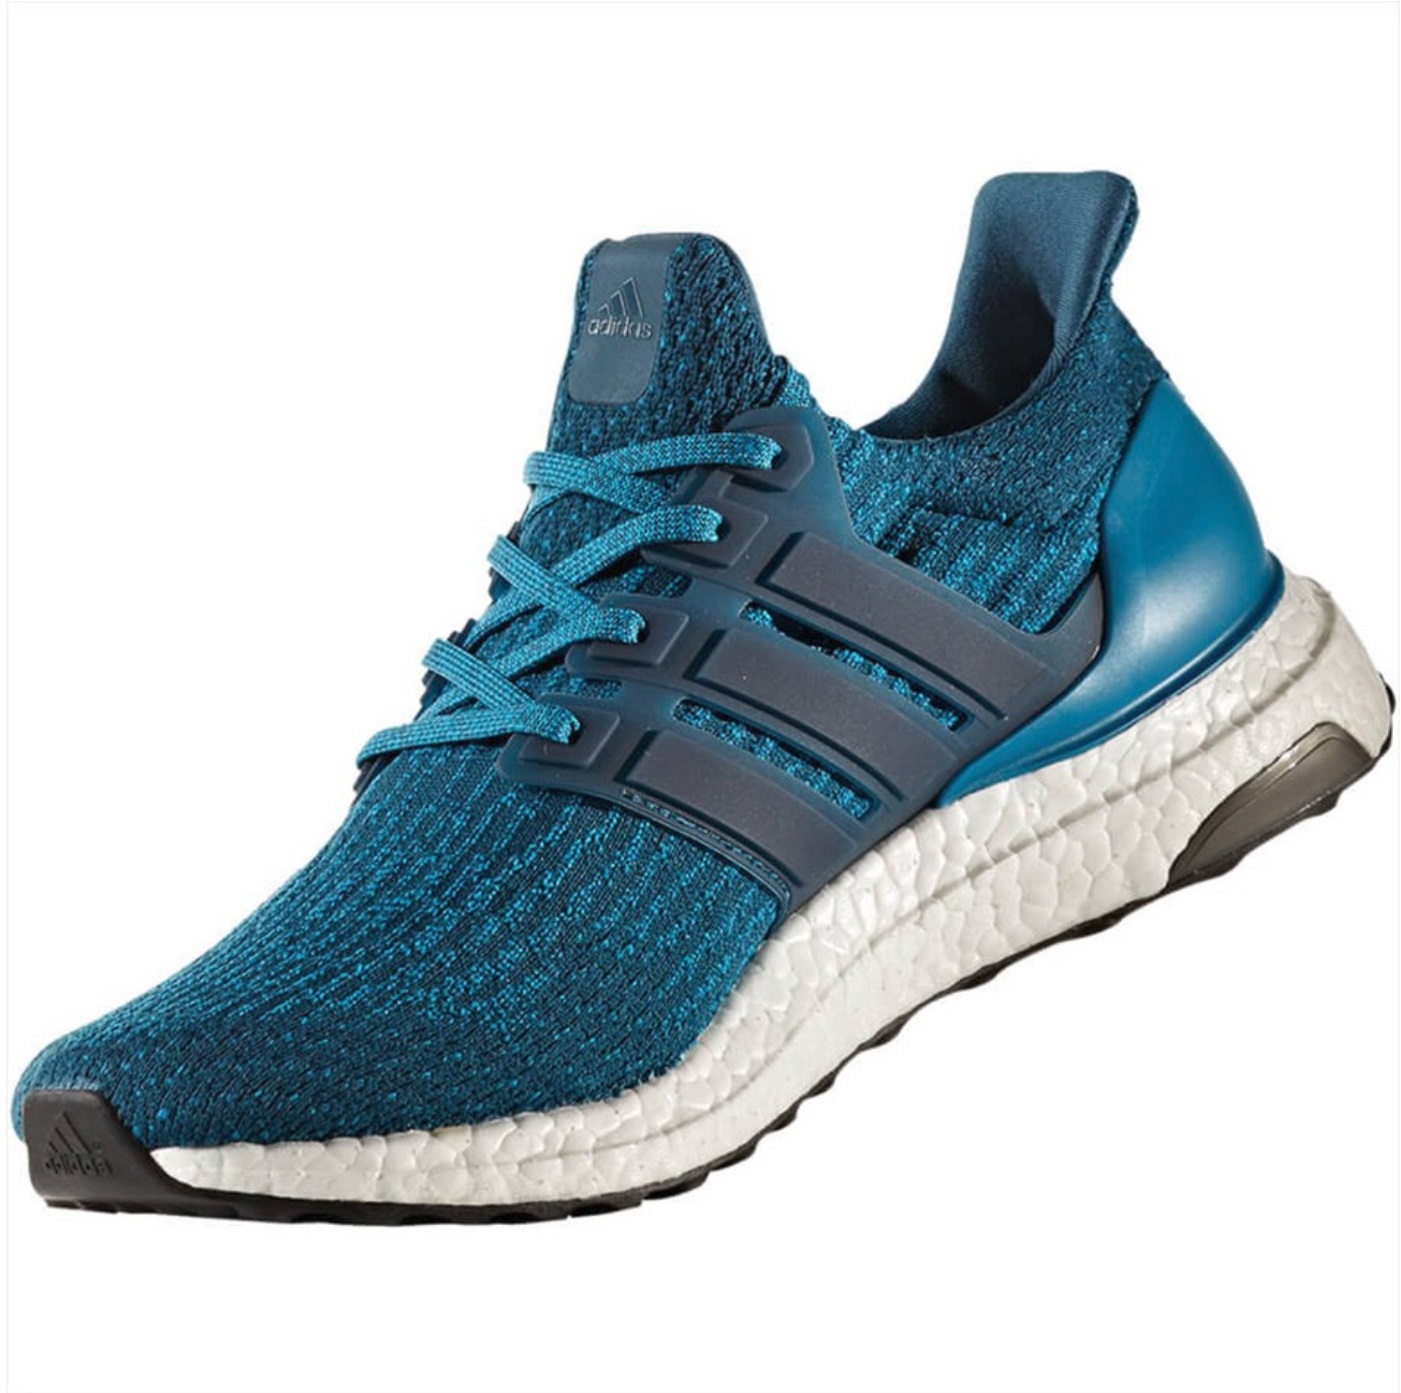 Adidas Ultra Boost C-S82021 For Men